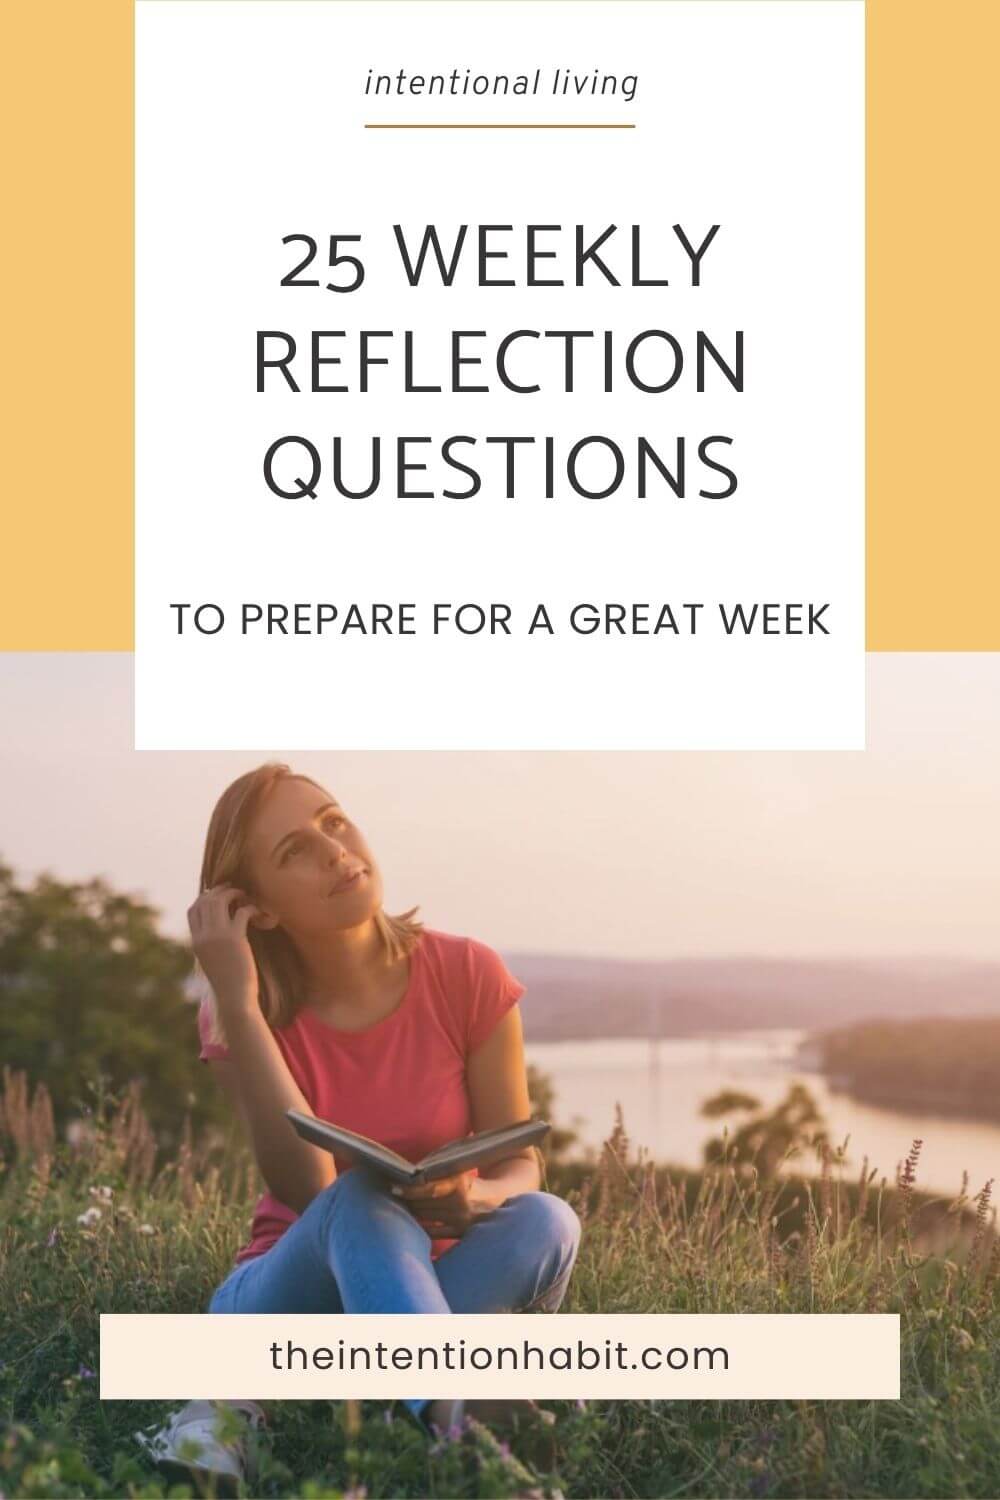 25 weekly reflection questions to prepare for a great week.